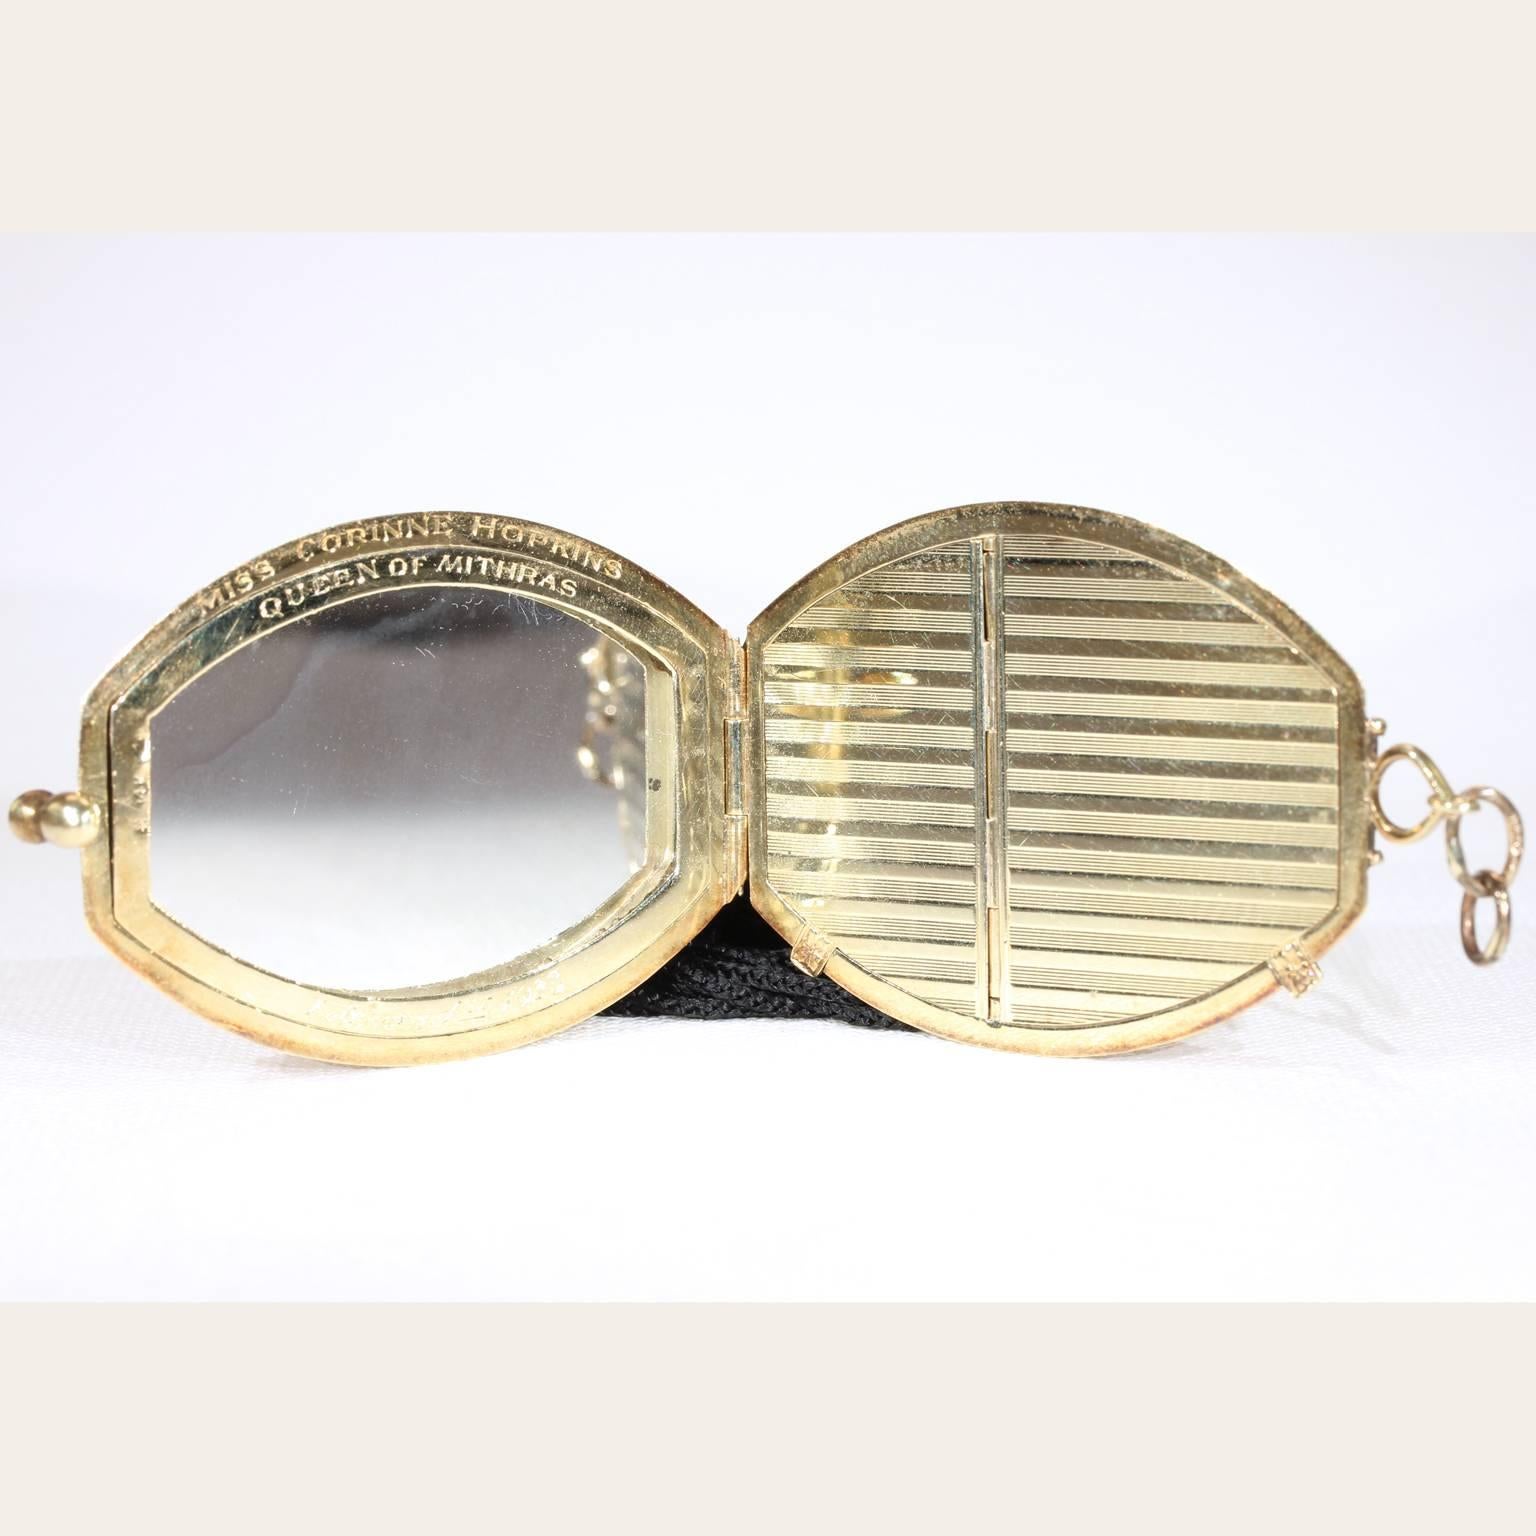 This vintage Art Deco gold compact pendant has a pretty sapphire catch and a fashionable black tassel drop. The front motif bears the letters, ‘CH’ within an ovular frame. The entire piece is engraved with golden structural stripes flowing